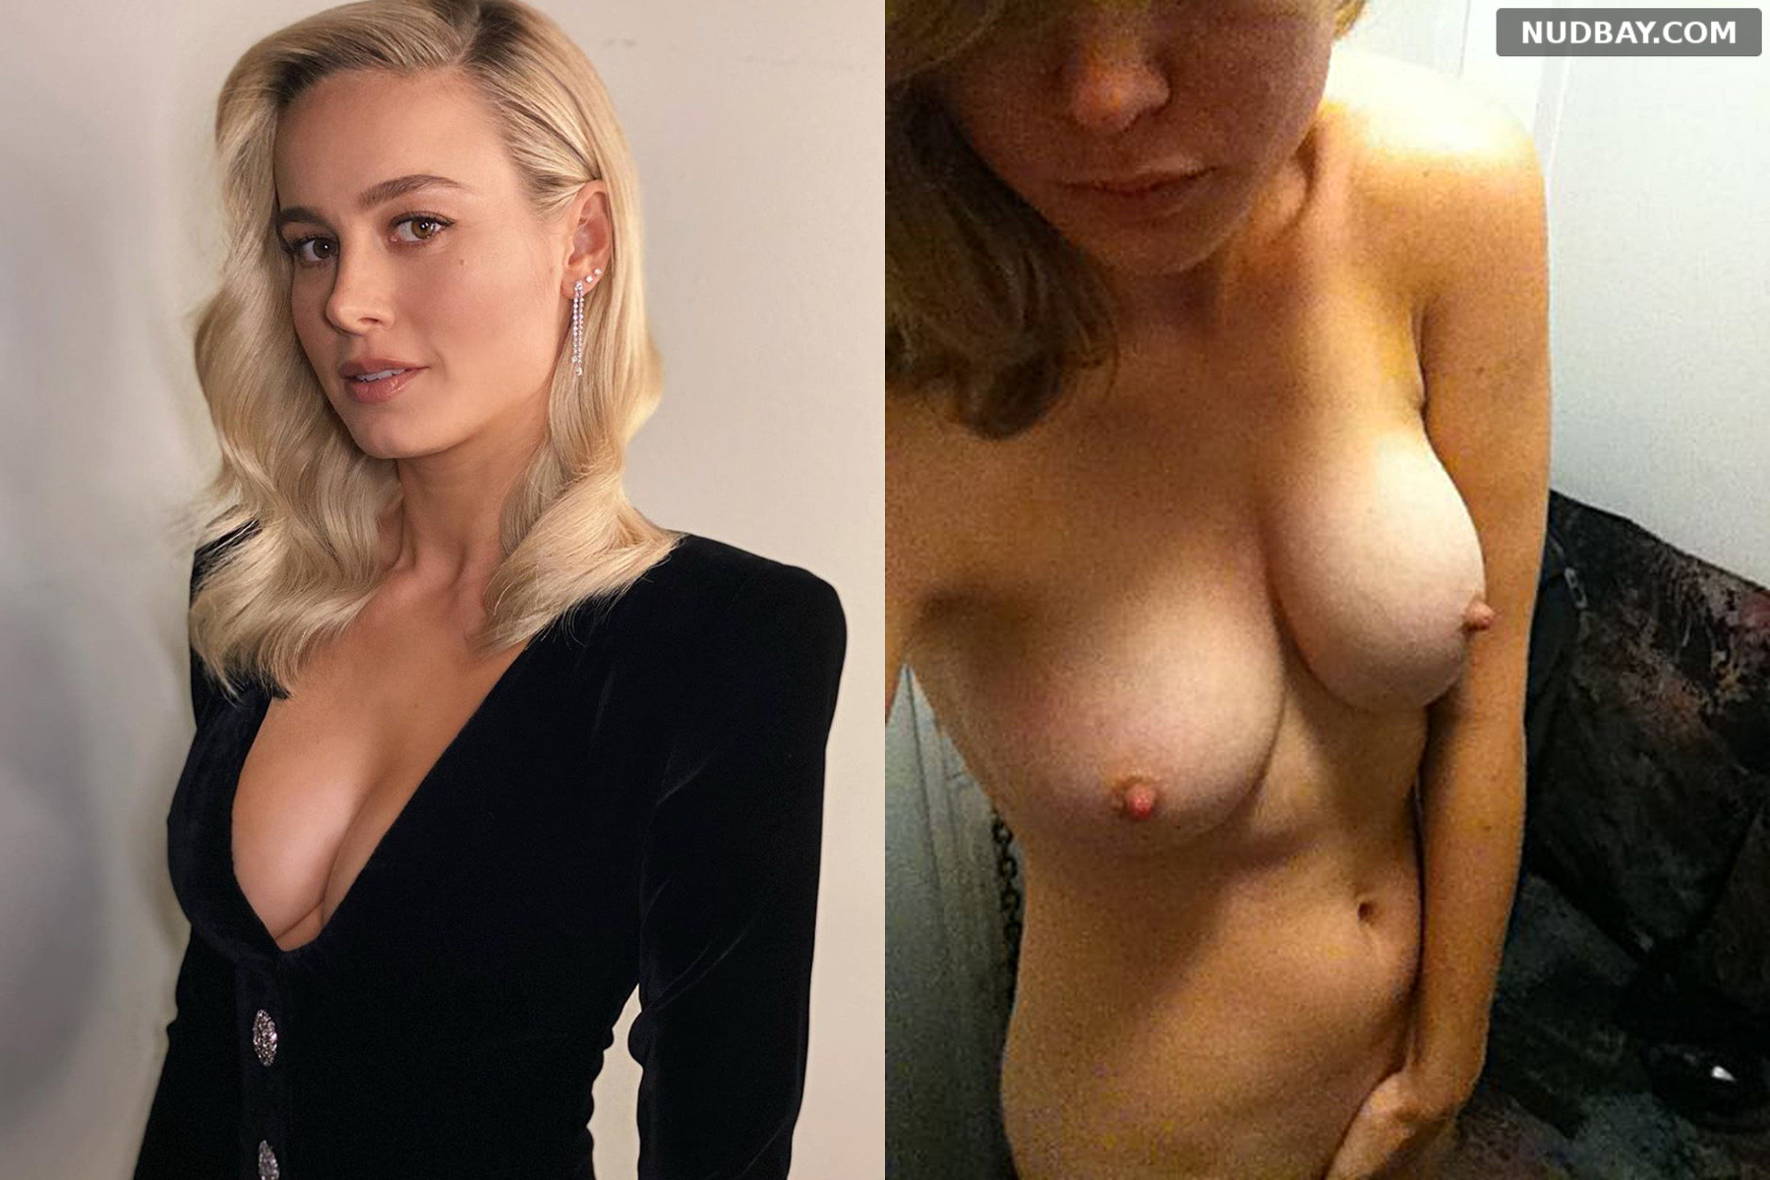 Bri larson naked - 🧡 Brie Larson Nude The Fappening - Page 2 - FappeningGr...